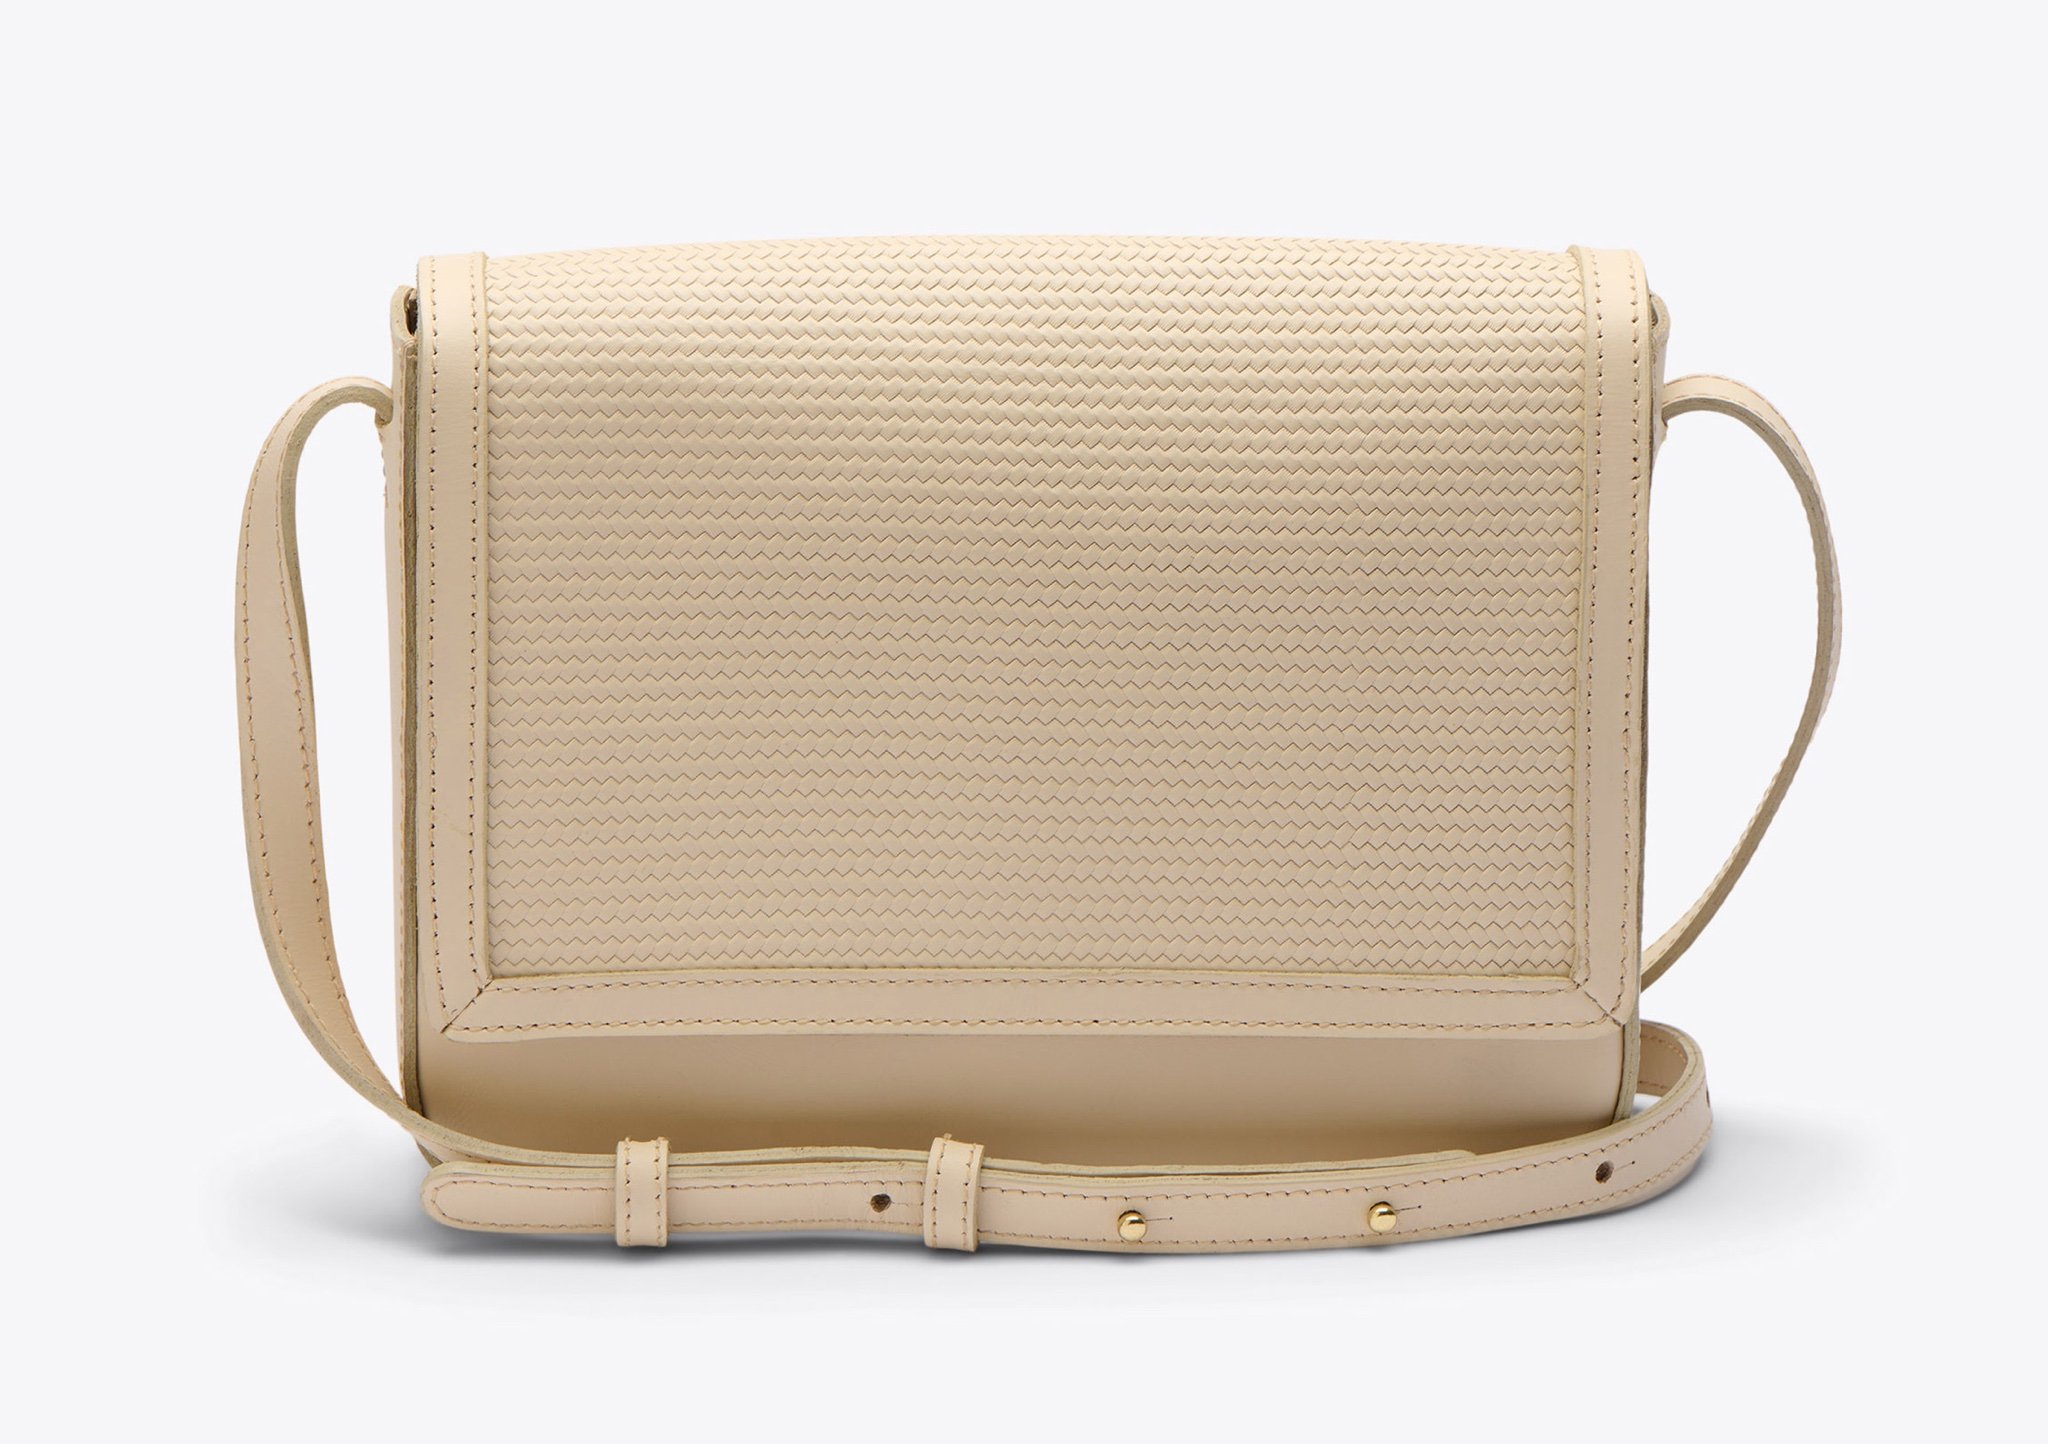 Nisolo Clara Crossbody Woven Bone - Every Nisolo product is built on the foundation of comfort, function, and design. 